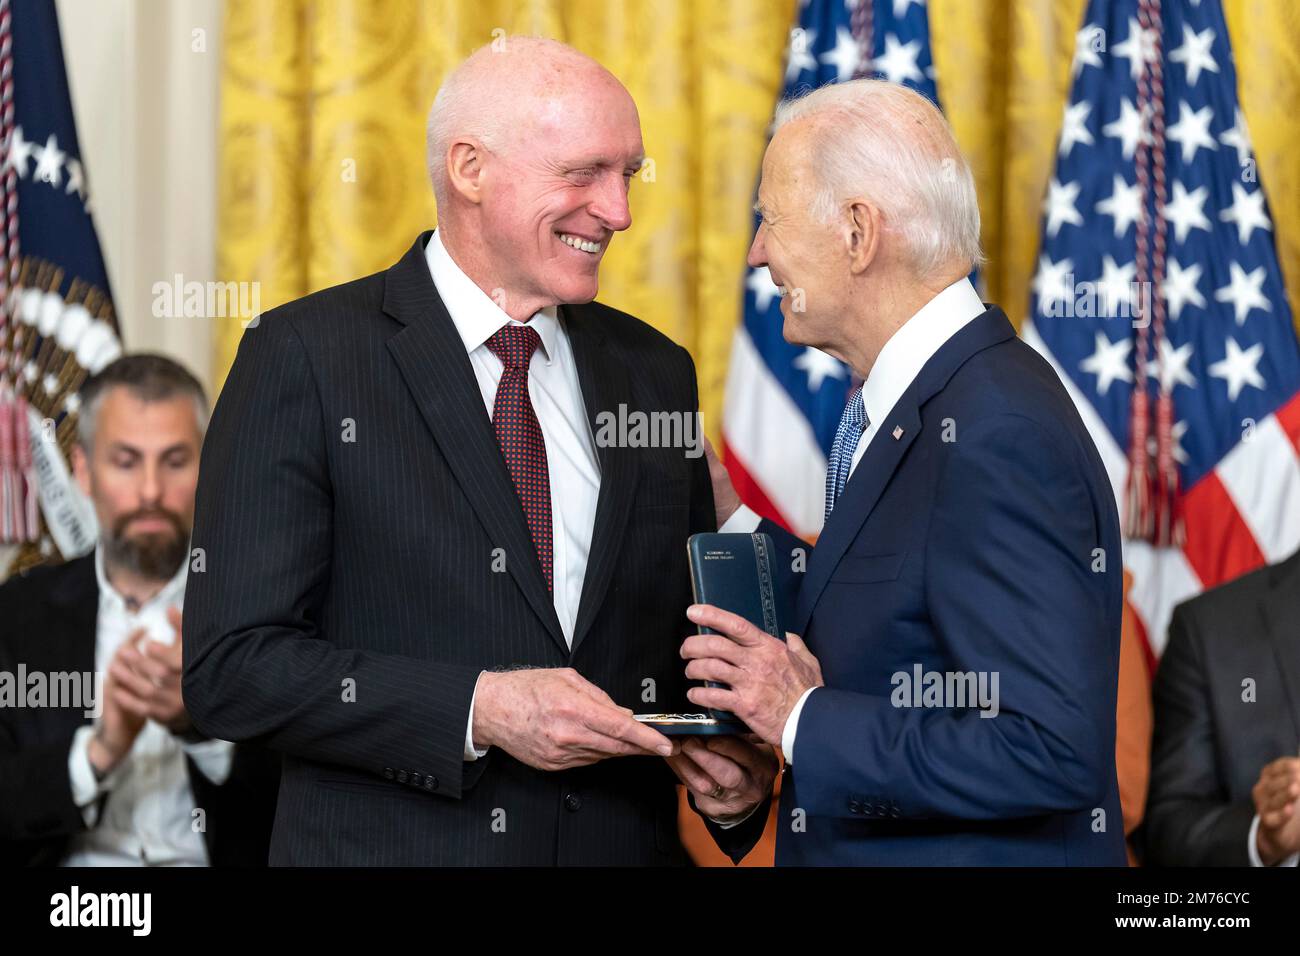 Washington, United States Of America. 06th Jan, 2023. Washington, United States of America. 06 January, 2023. U.S President Joe Biden awards the Presidential Citizens Medal to Speaker of Arizona House of Representatives, Rusty Bowers, left, for her role in securing the integrity of the 2020 elections during a ceremony at the East Room of the White House, January 6, 2023 in Washington, DC The ceremony marked the two-year anniversary of the January 6th insurrection. Credit: Adam Schultz/White House Photo/Alamy Live News Stock Photo